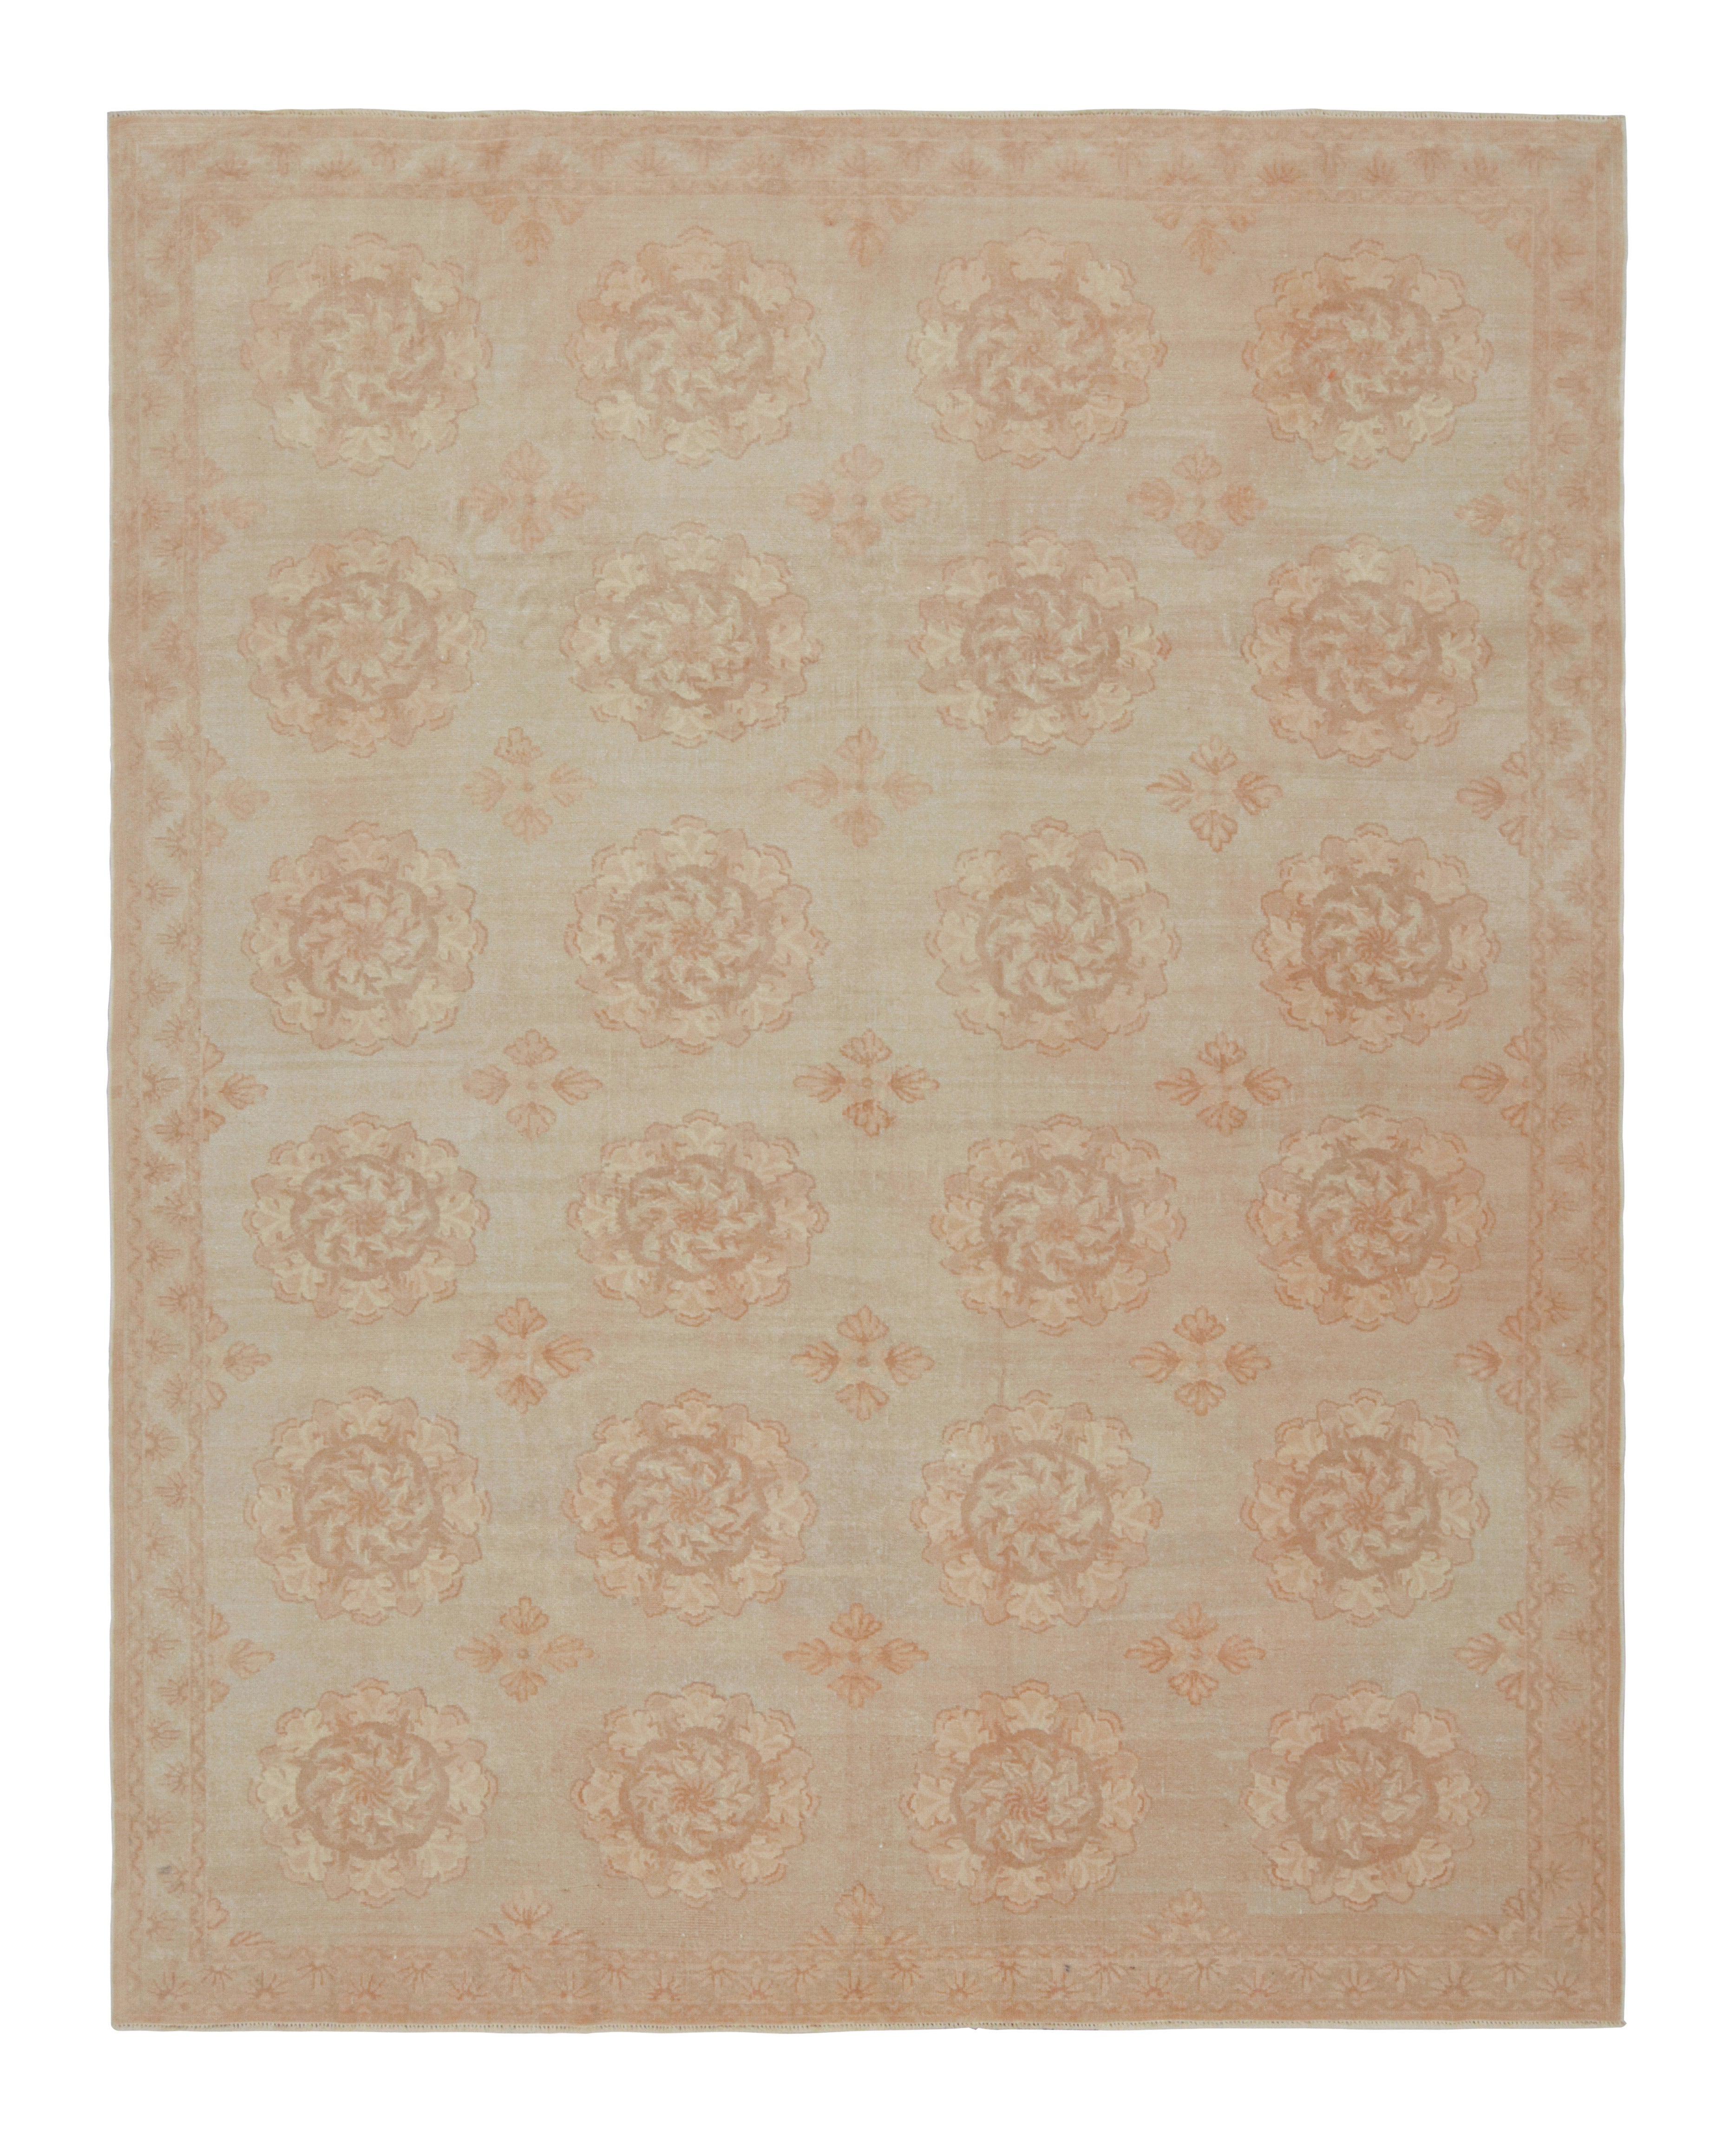 Rug & Kilim’s Contemporary European Style Rug with Beige-Brown Floral Medallions For Sale